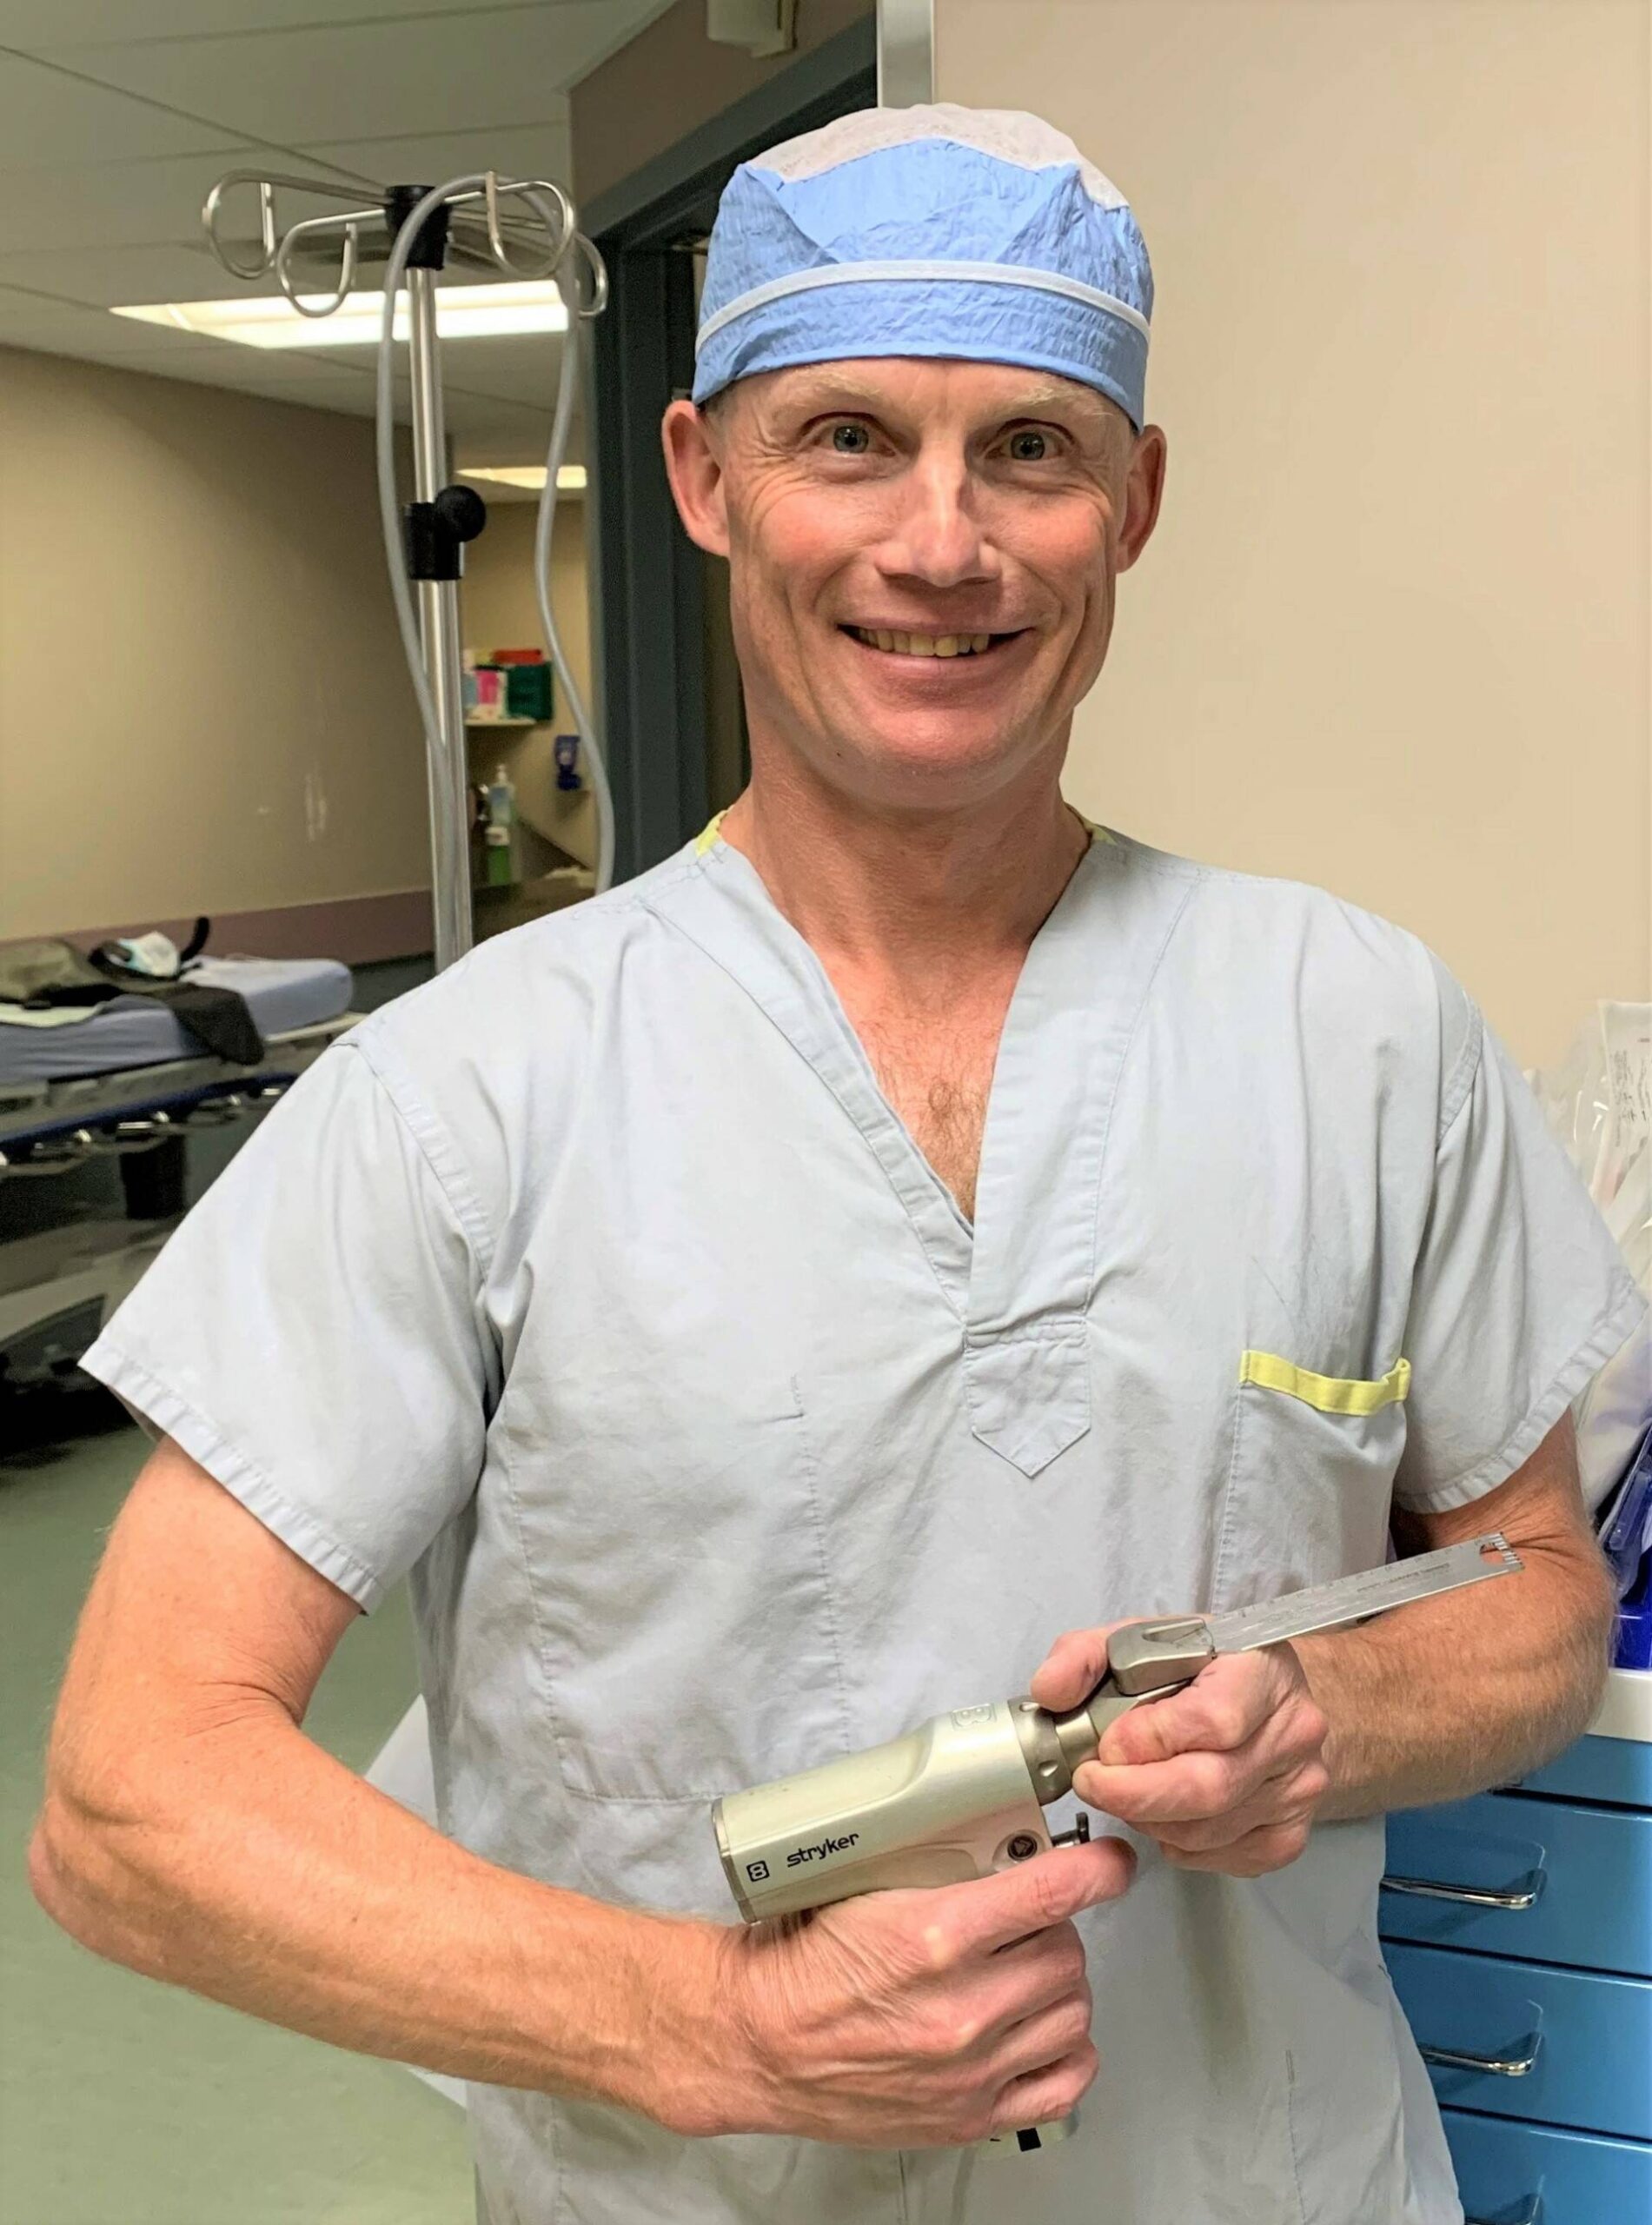 Dr. Seth Bitting, orthopedic surgeon, is a specialist using new equipment purchased for KBRH. Photo: Submitted